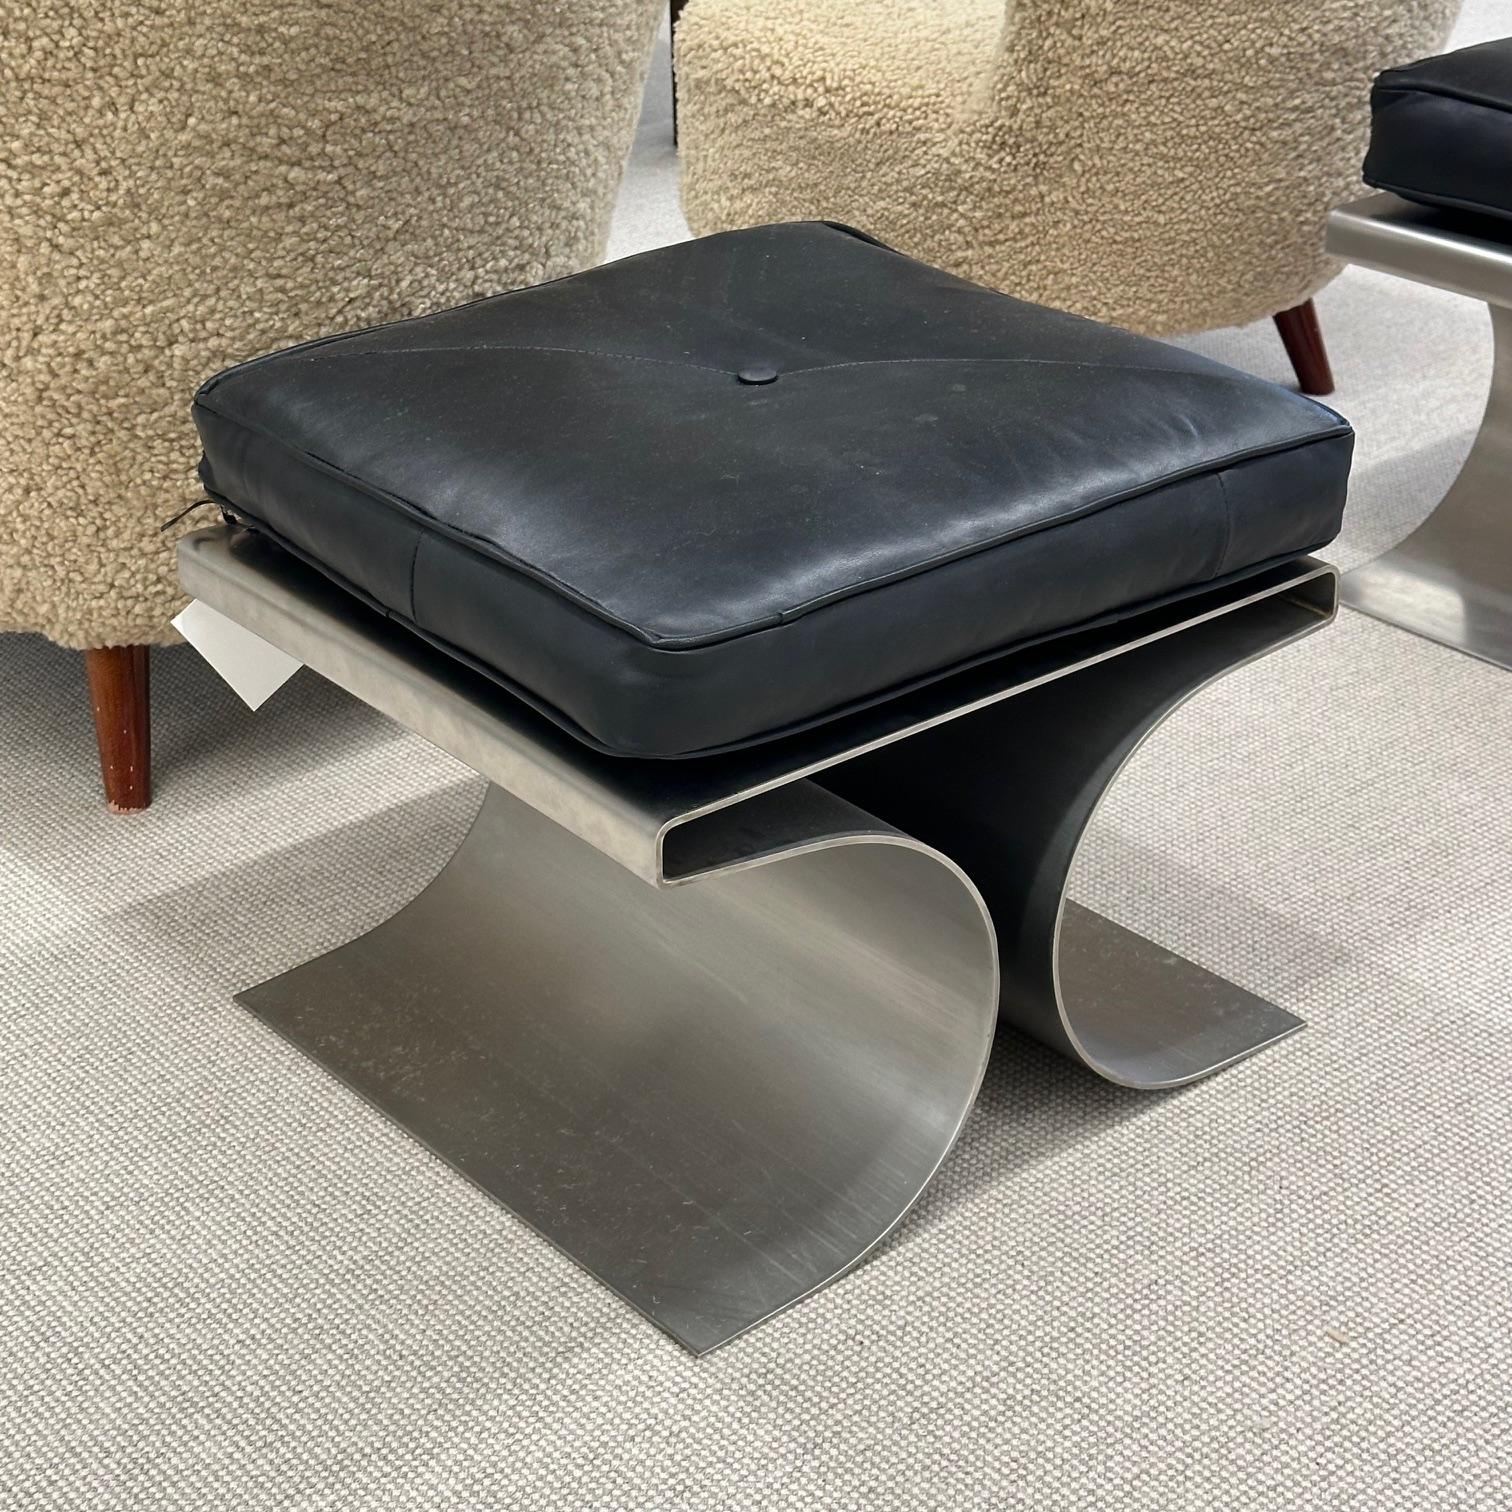 20th Century Michel Boyer Style Mid-Century Modern Footstools, Stainless Steel, Black Leather